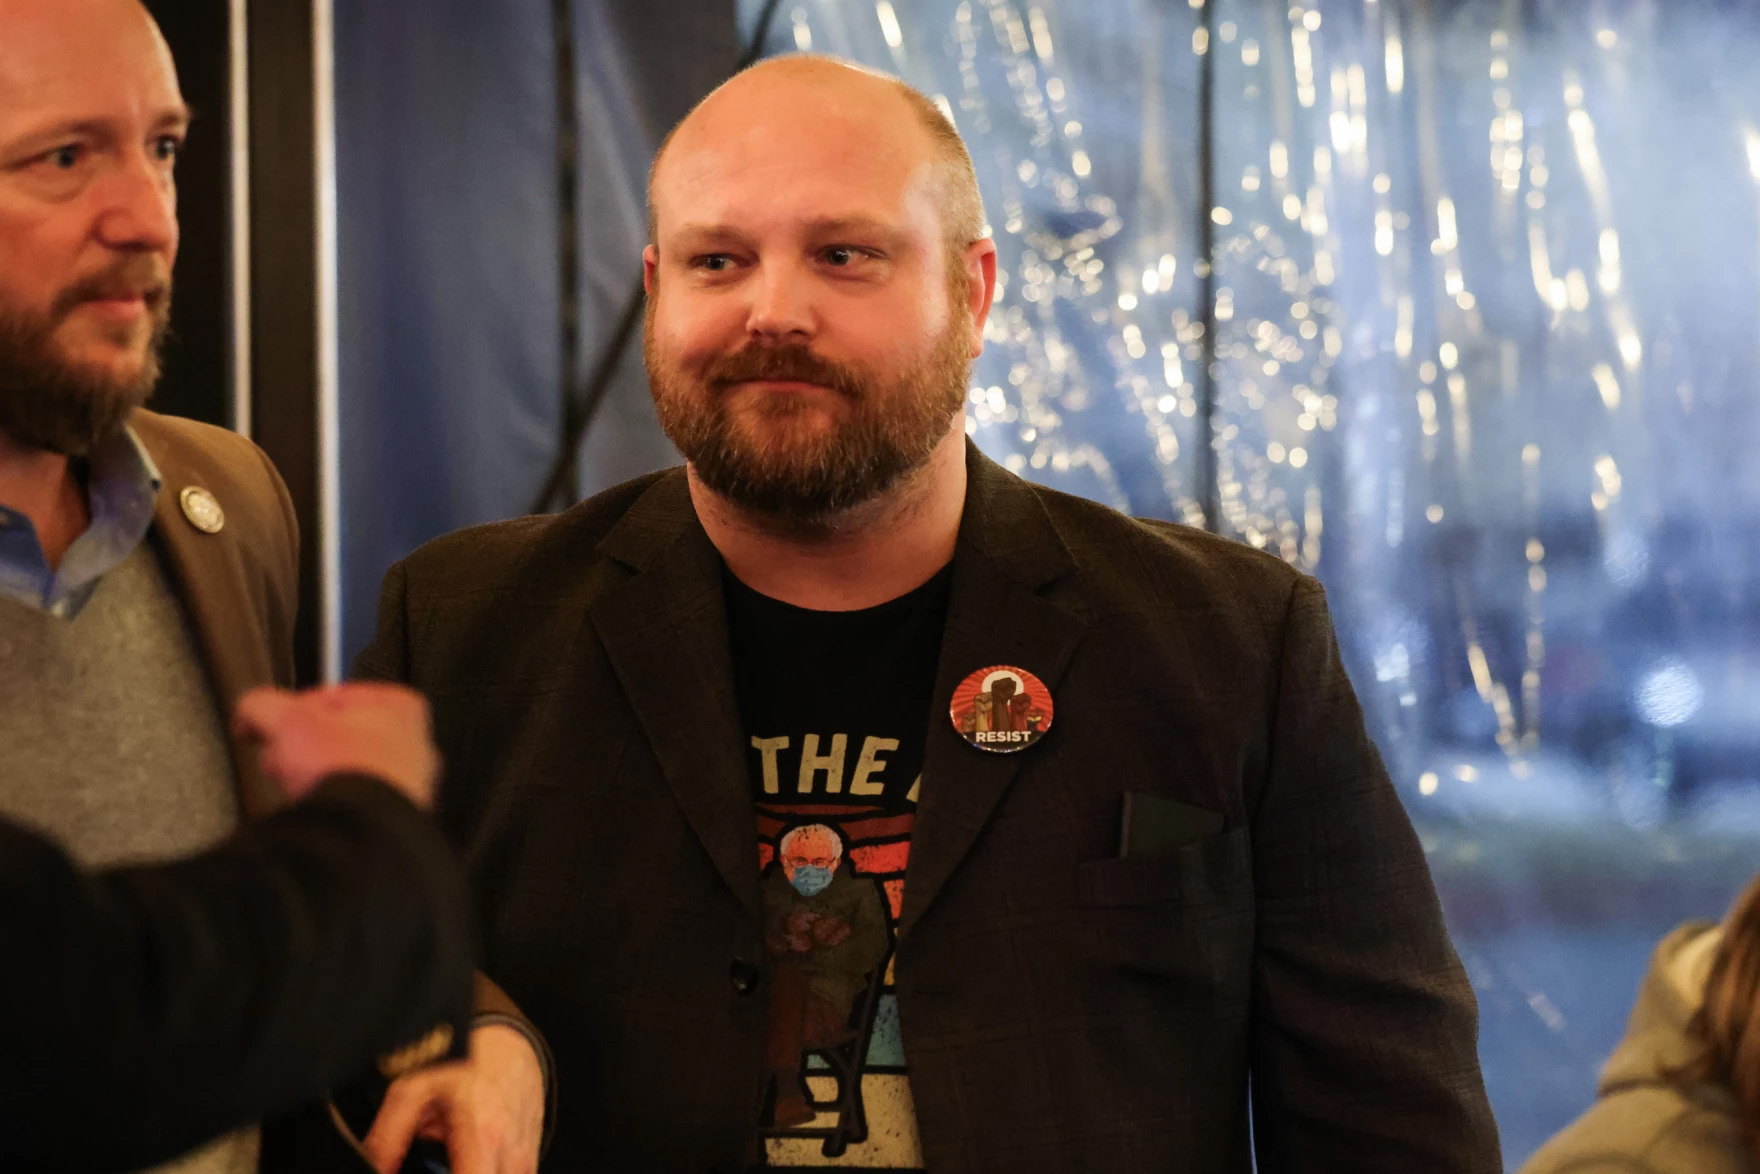 A man grins, looking off to the side. He is bald and sporting a beard, wearing a sport coat over a Bernie Sanders t-shirt and has a button reading 